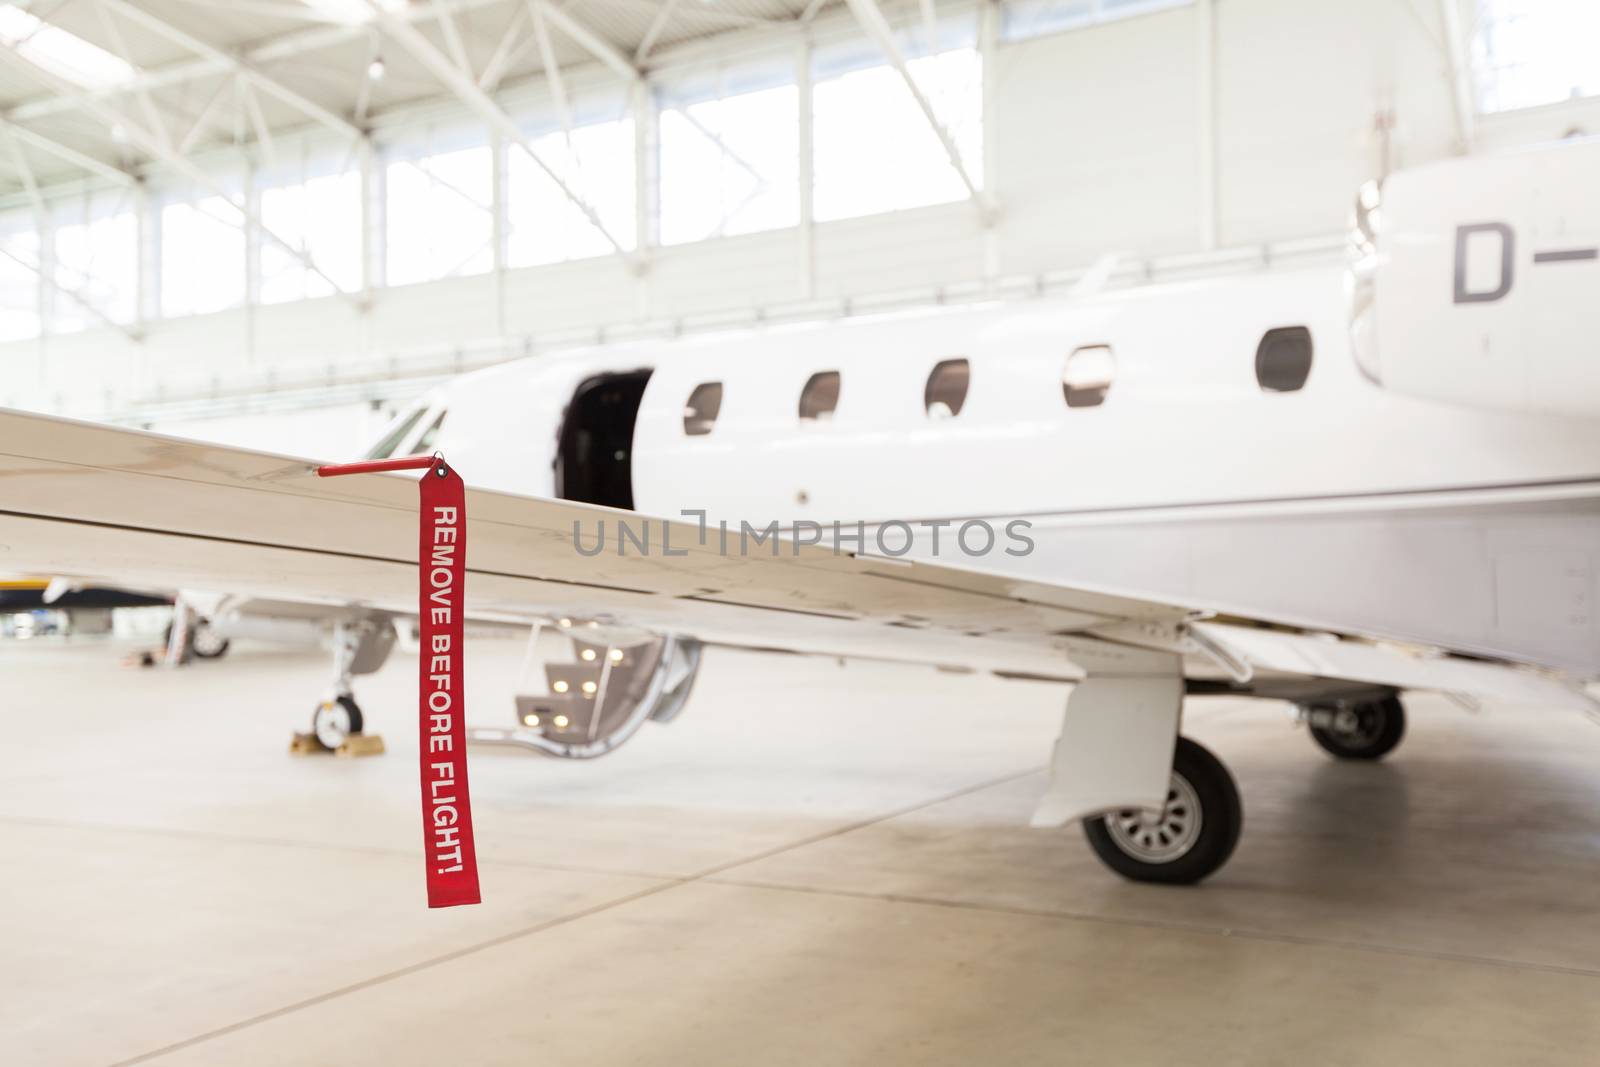 Airplane in Hangar with remove before flight Labels in red warning safety